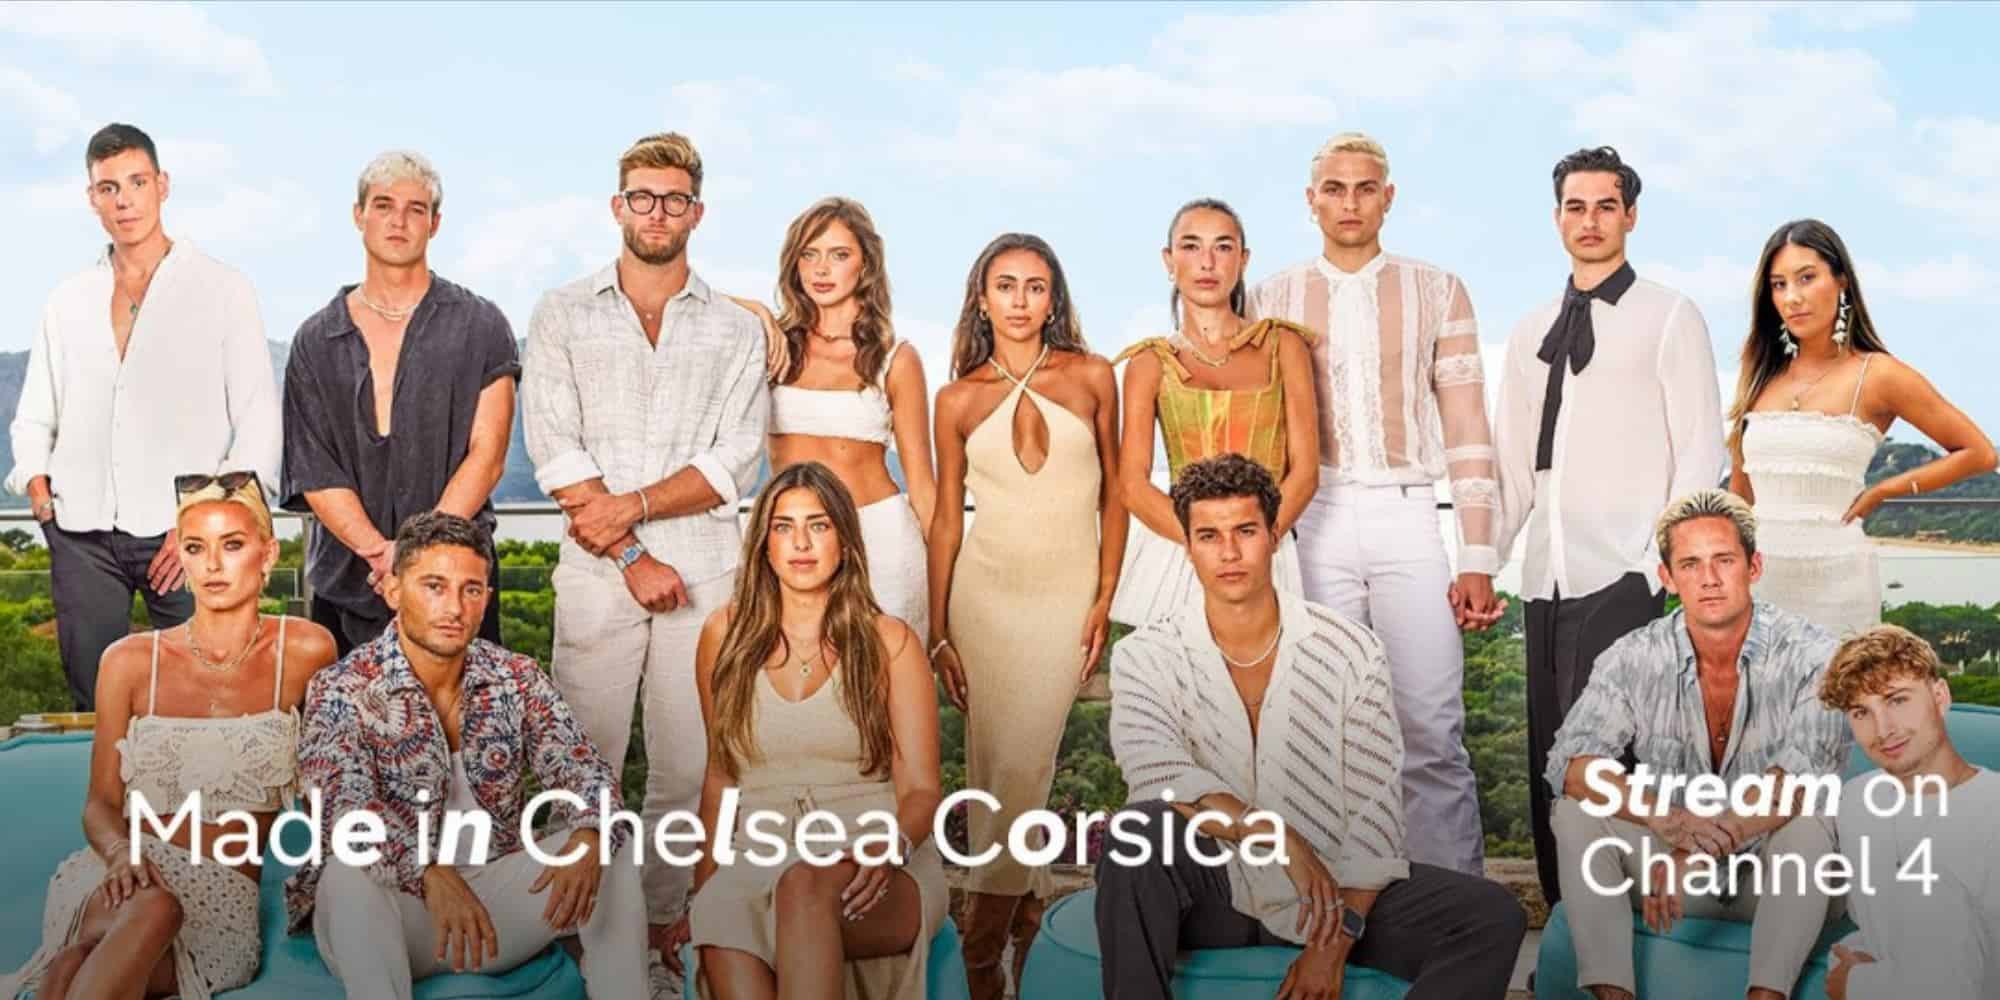 Made in Chelsea Corsica Episode 3 Release Date